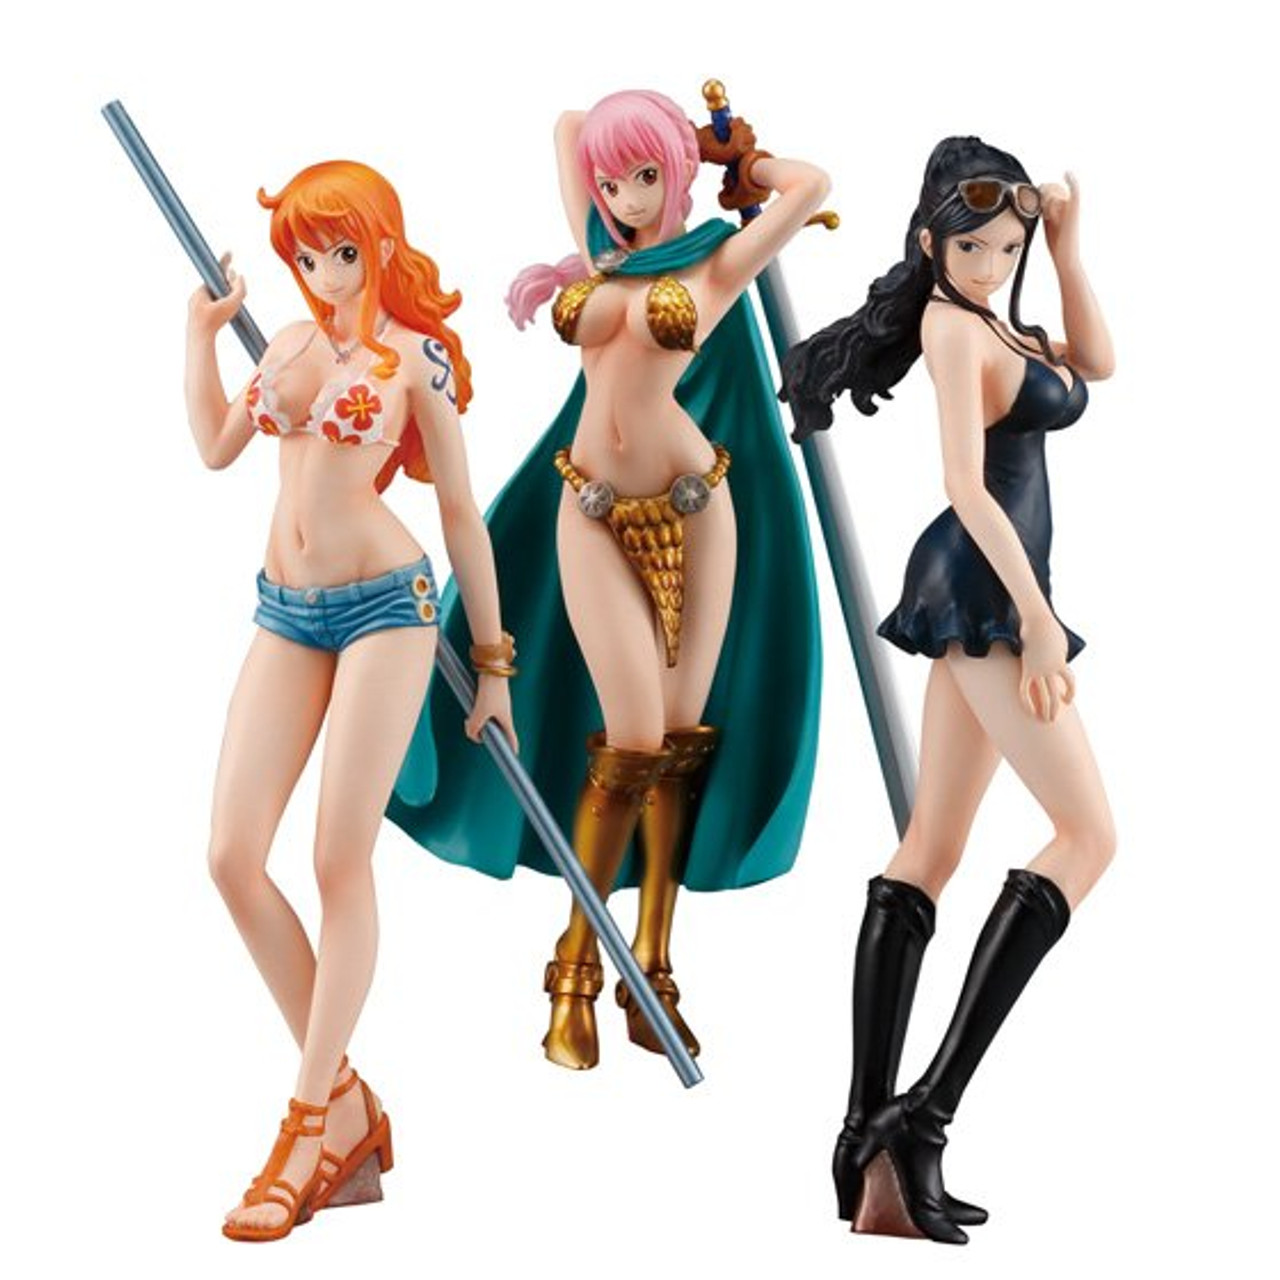 ABYstyle One Piece Robin and Nami Acryl 4-in Figure Set